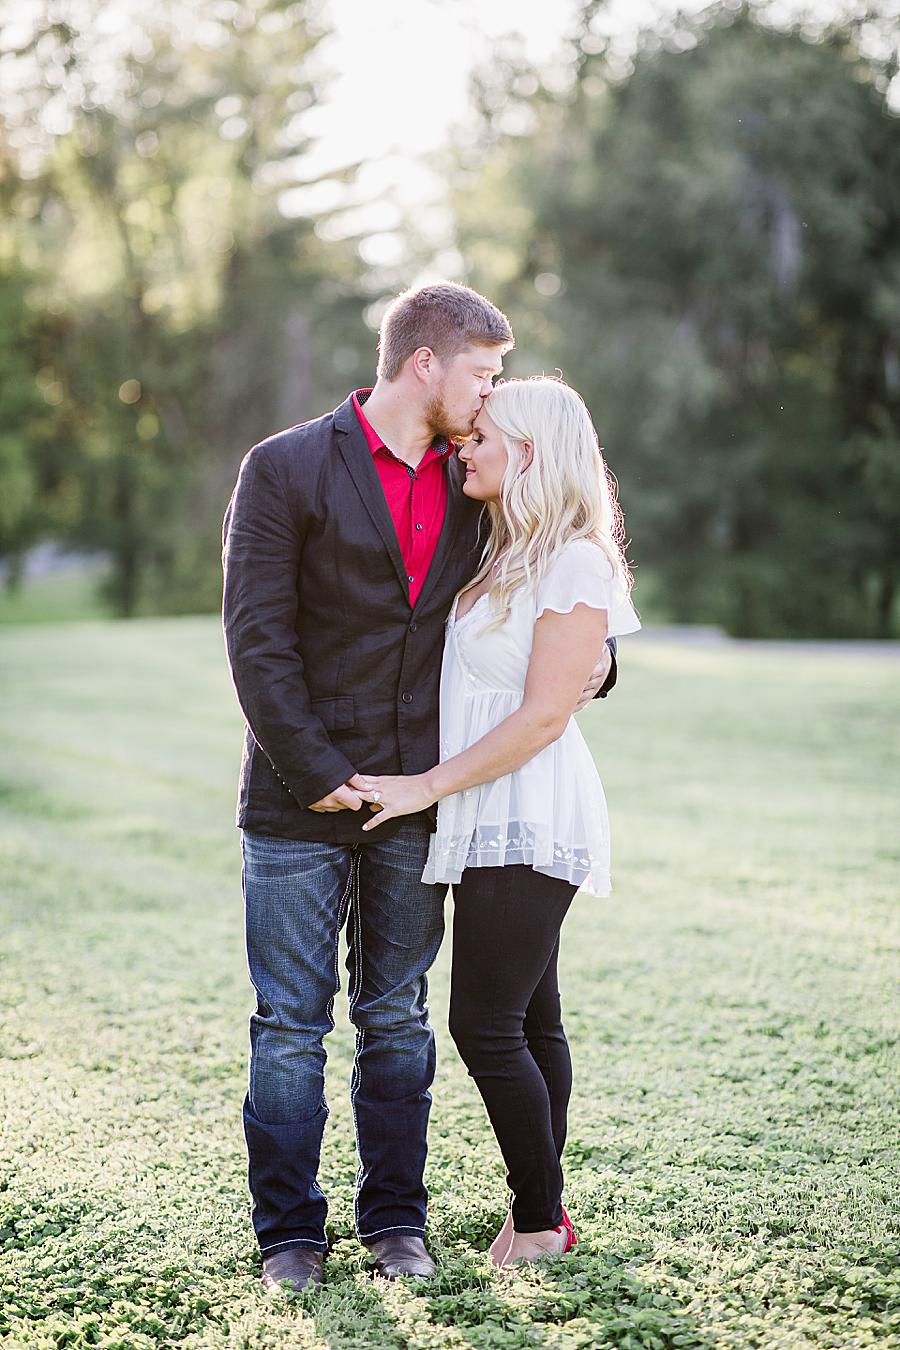 Forehead kiss at this Apple Barn engagement by Knoxville Wedding Photographer, Amanda May Photos.